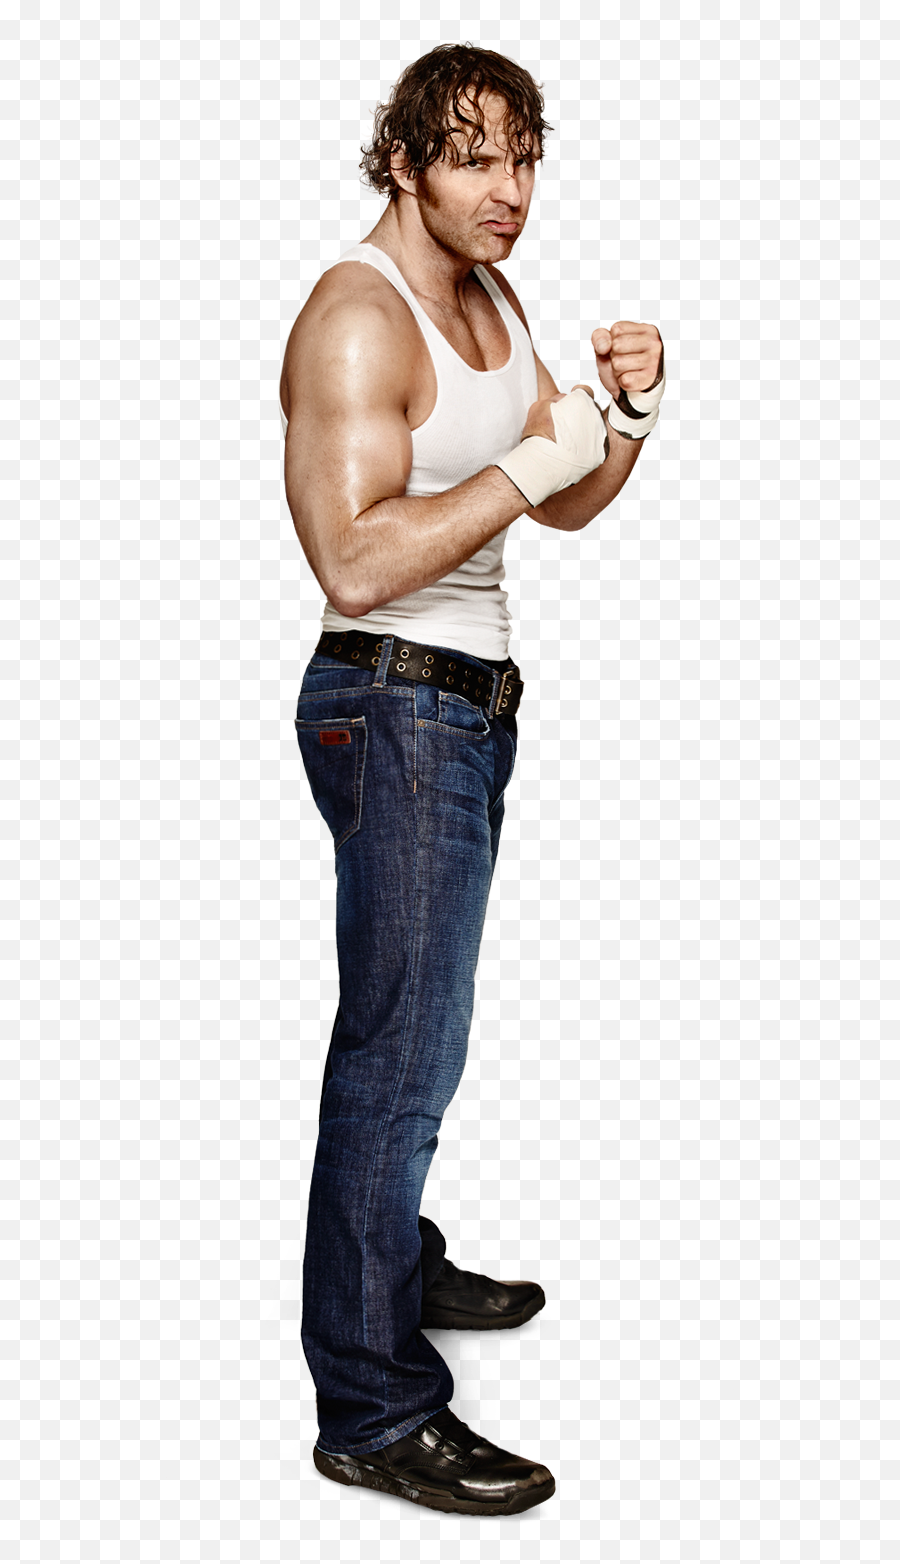 Dean Ambrose - Ec3 Vs Dean Ambrose Png,Dean Ambrose Png